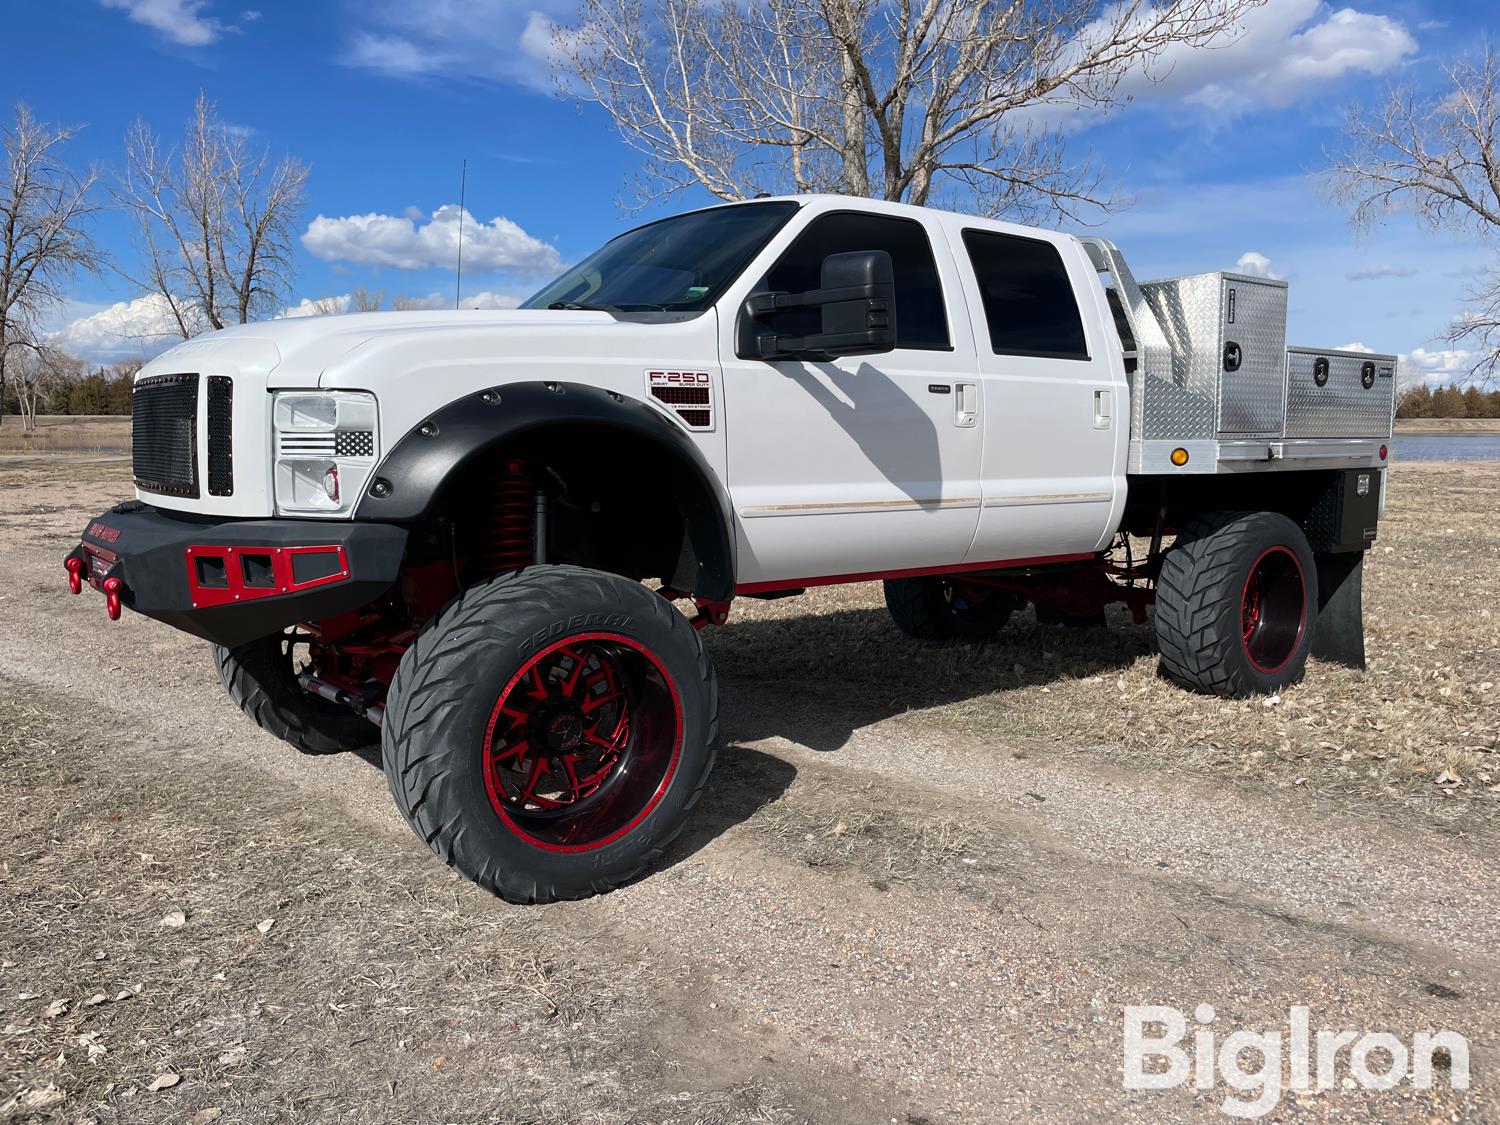 4x4 lifted flatbed truck